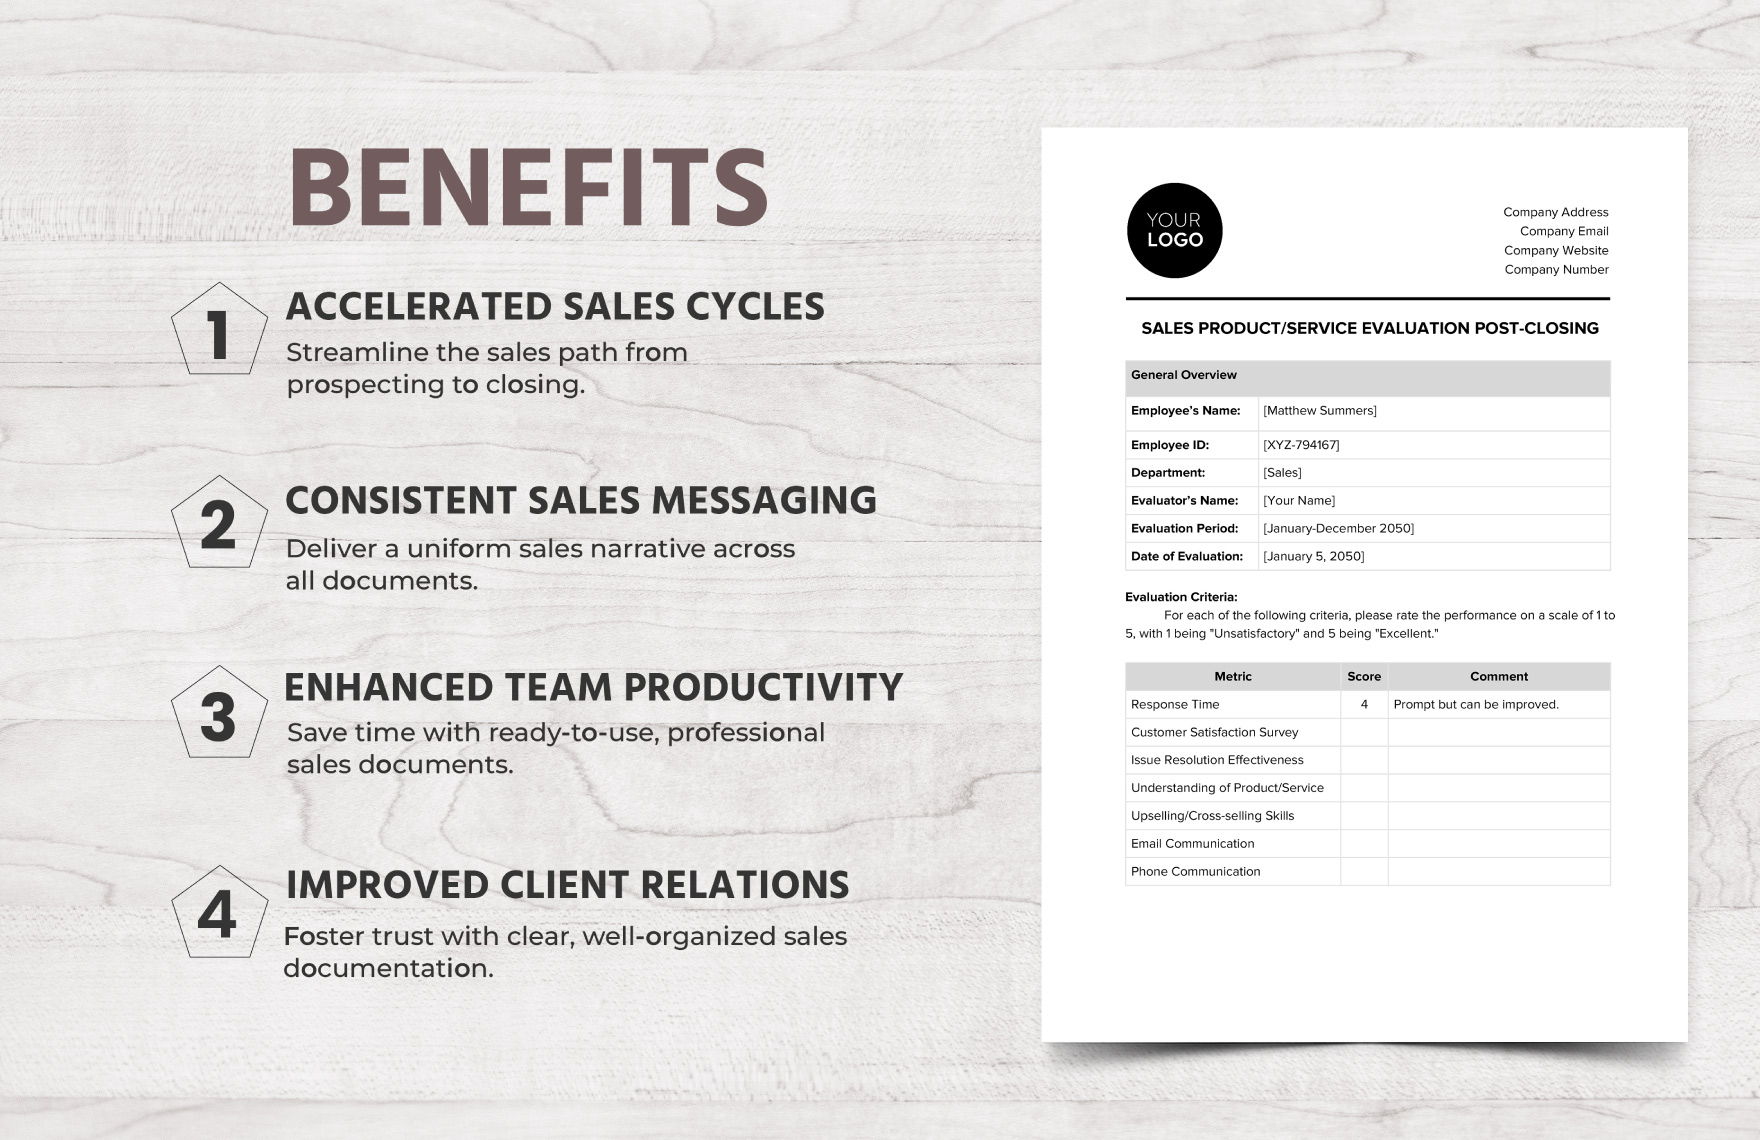 Sales Product/Service Evaluation Post-Closing Template